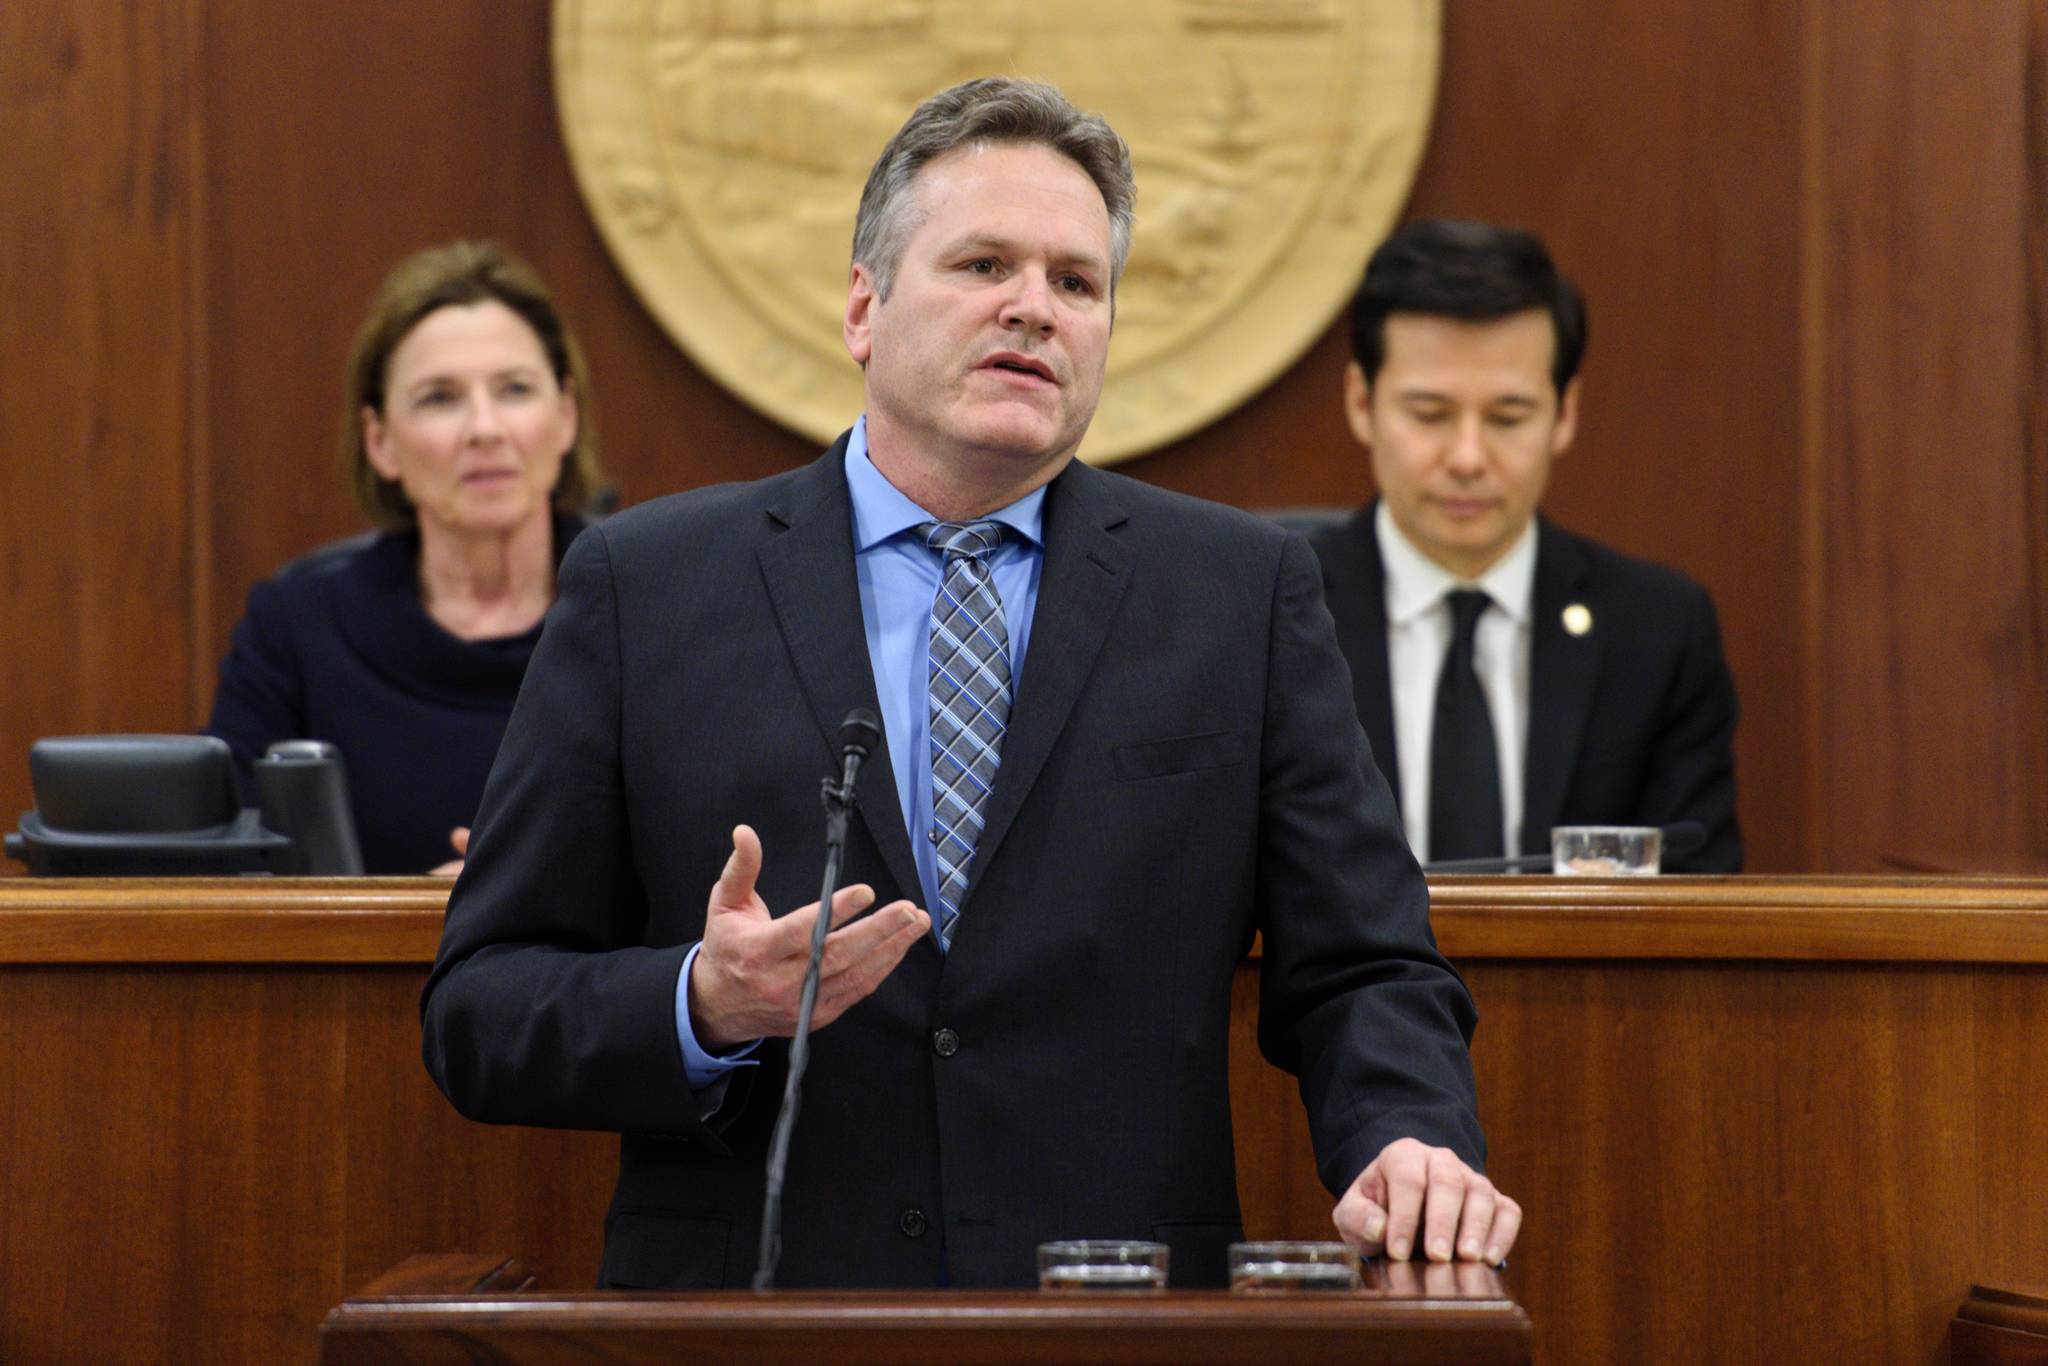 Gov. Mike Dunleavy delivers the State of the State address on Jan. 22, 2019 in the Alaska Capitol. (Michael Penn | Juneau Empire)